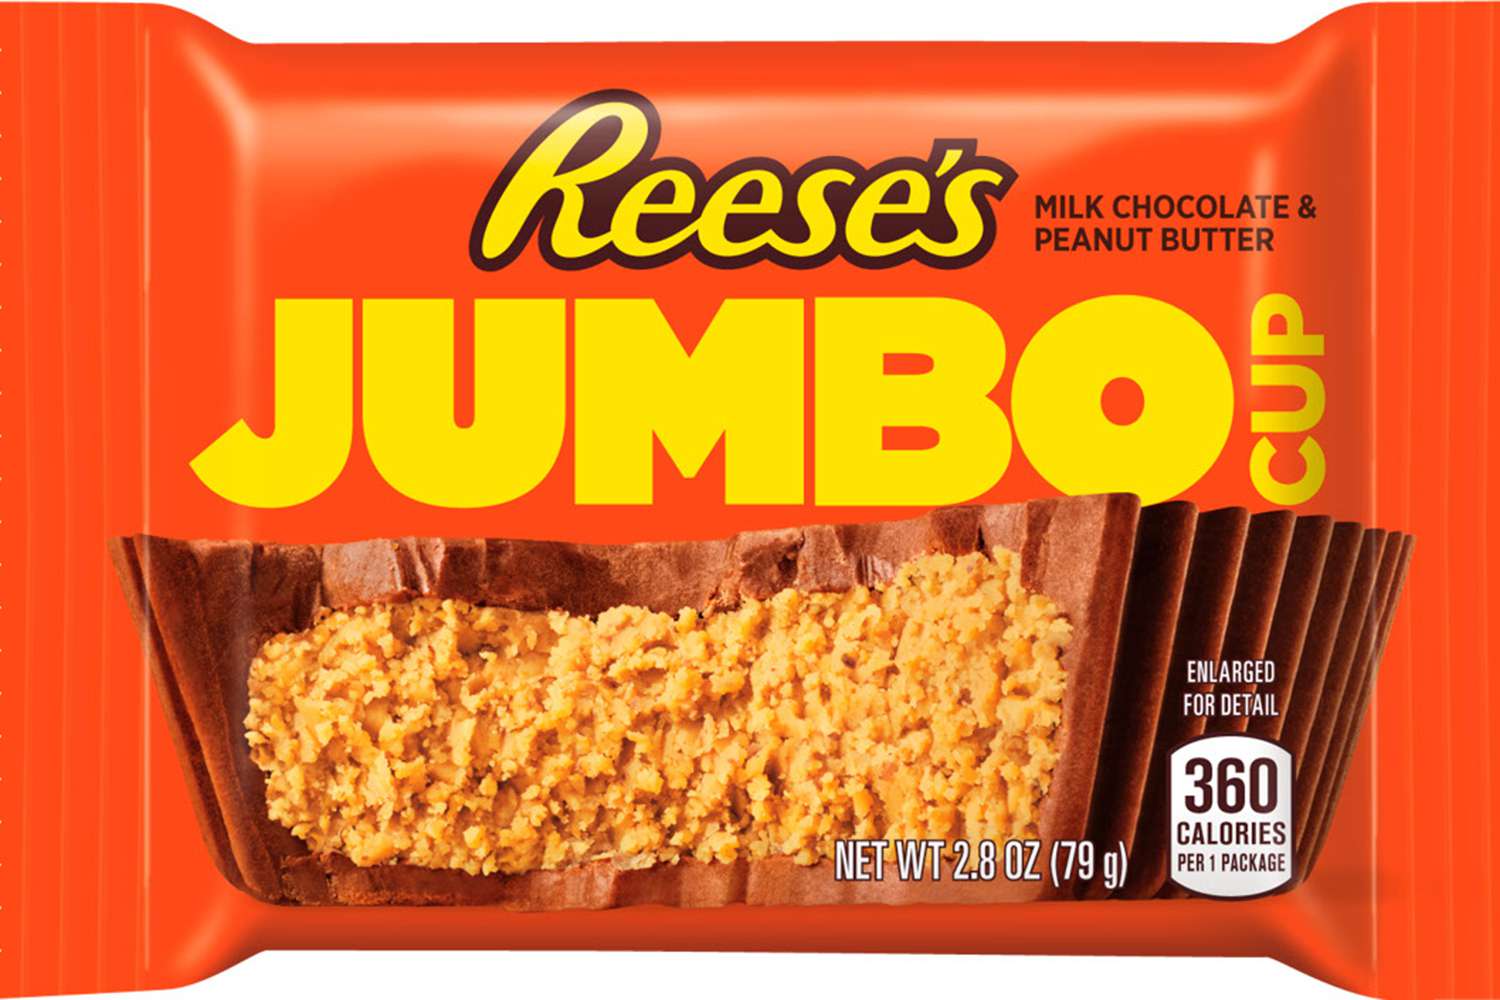 Reese’s Is Selling a Jumbo Cup Equivalent to 4 King-Size Peanut Butter Cups